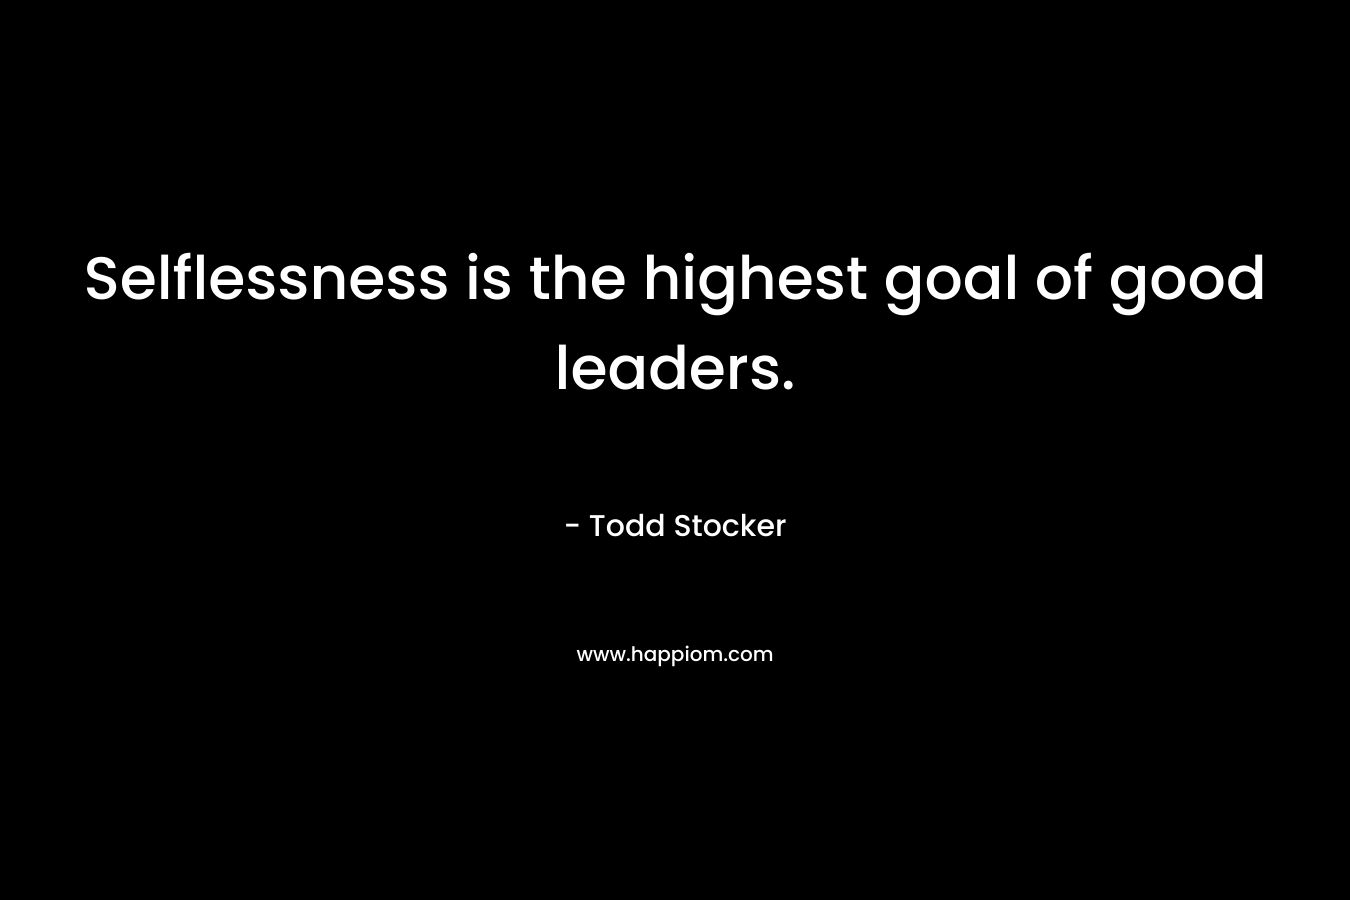 Selflessness is the highest goal of good leaders. – Todd Stocker